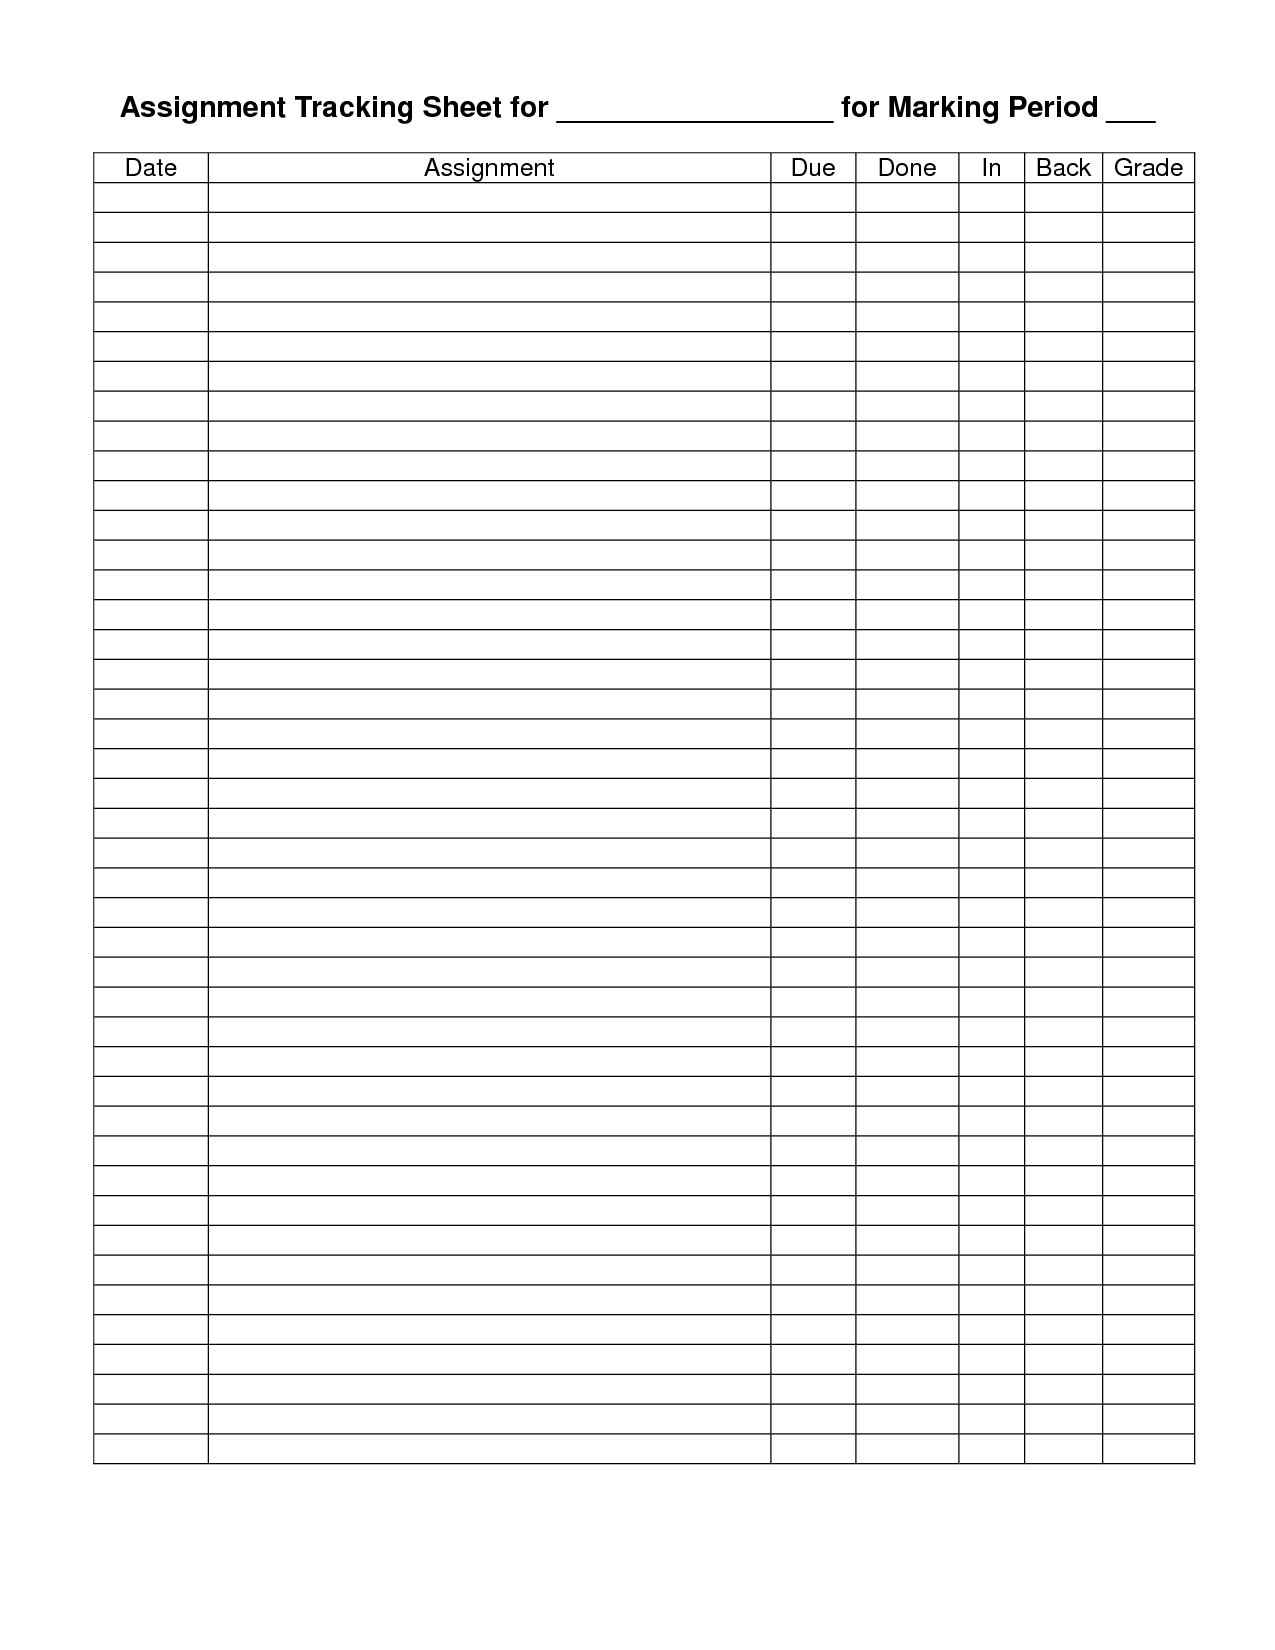 Assignment Tracker Printable Google Search High School